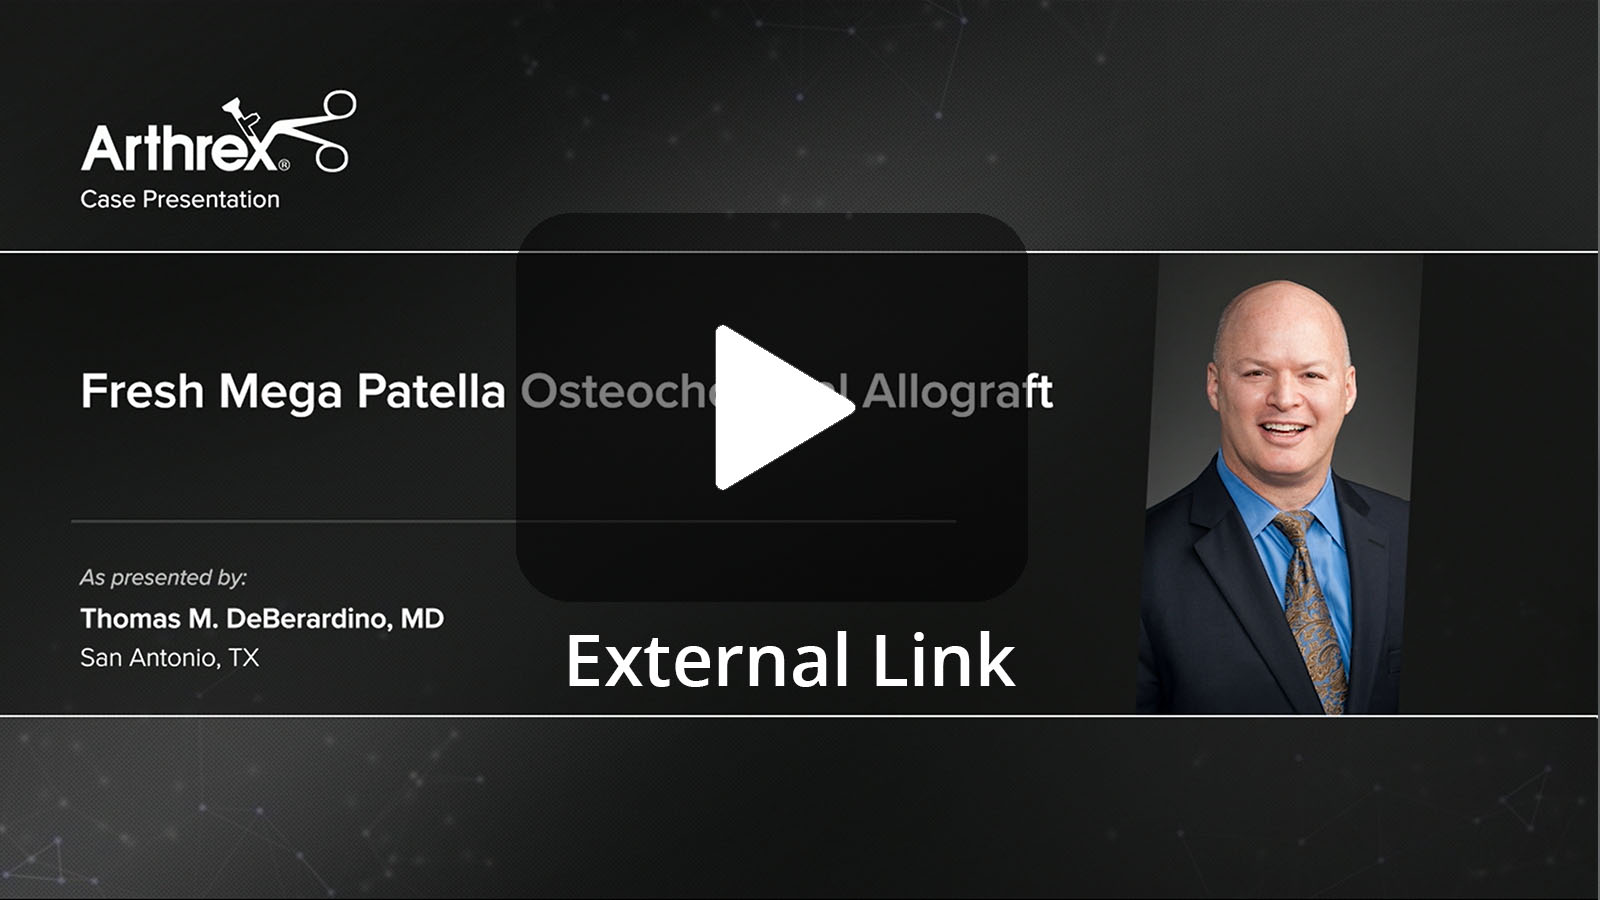 Thomas M. DeBerardino, MD presents a complex case that included an anterior cruciate ligament (ACL) revision, high-tibial osteotomy, medial meniscus allograft transplant, and fresh osteochondral allograft of the patella. (External Link)